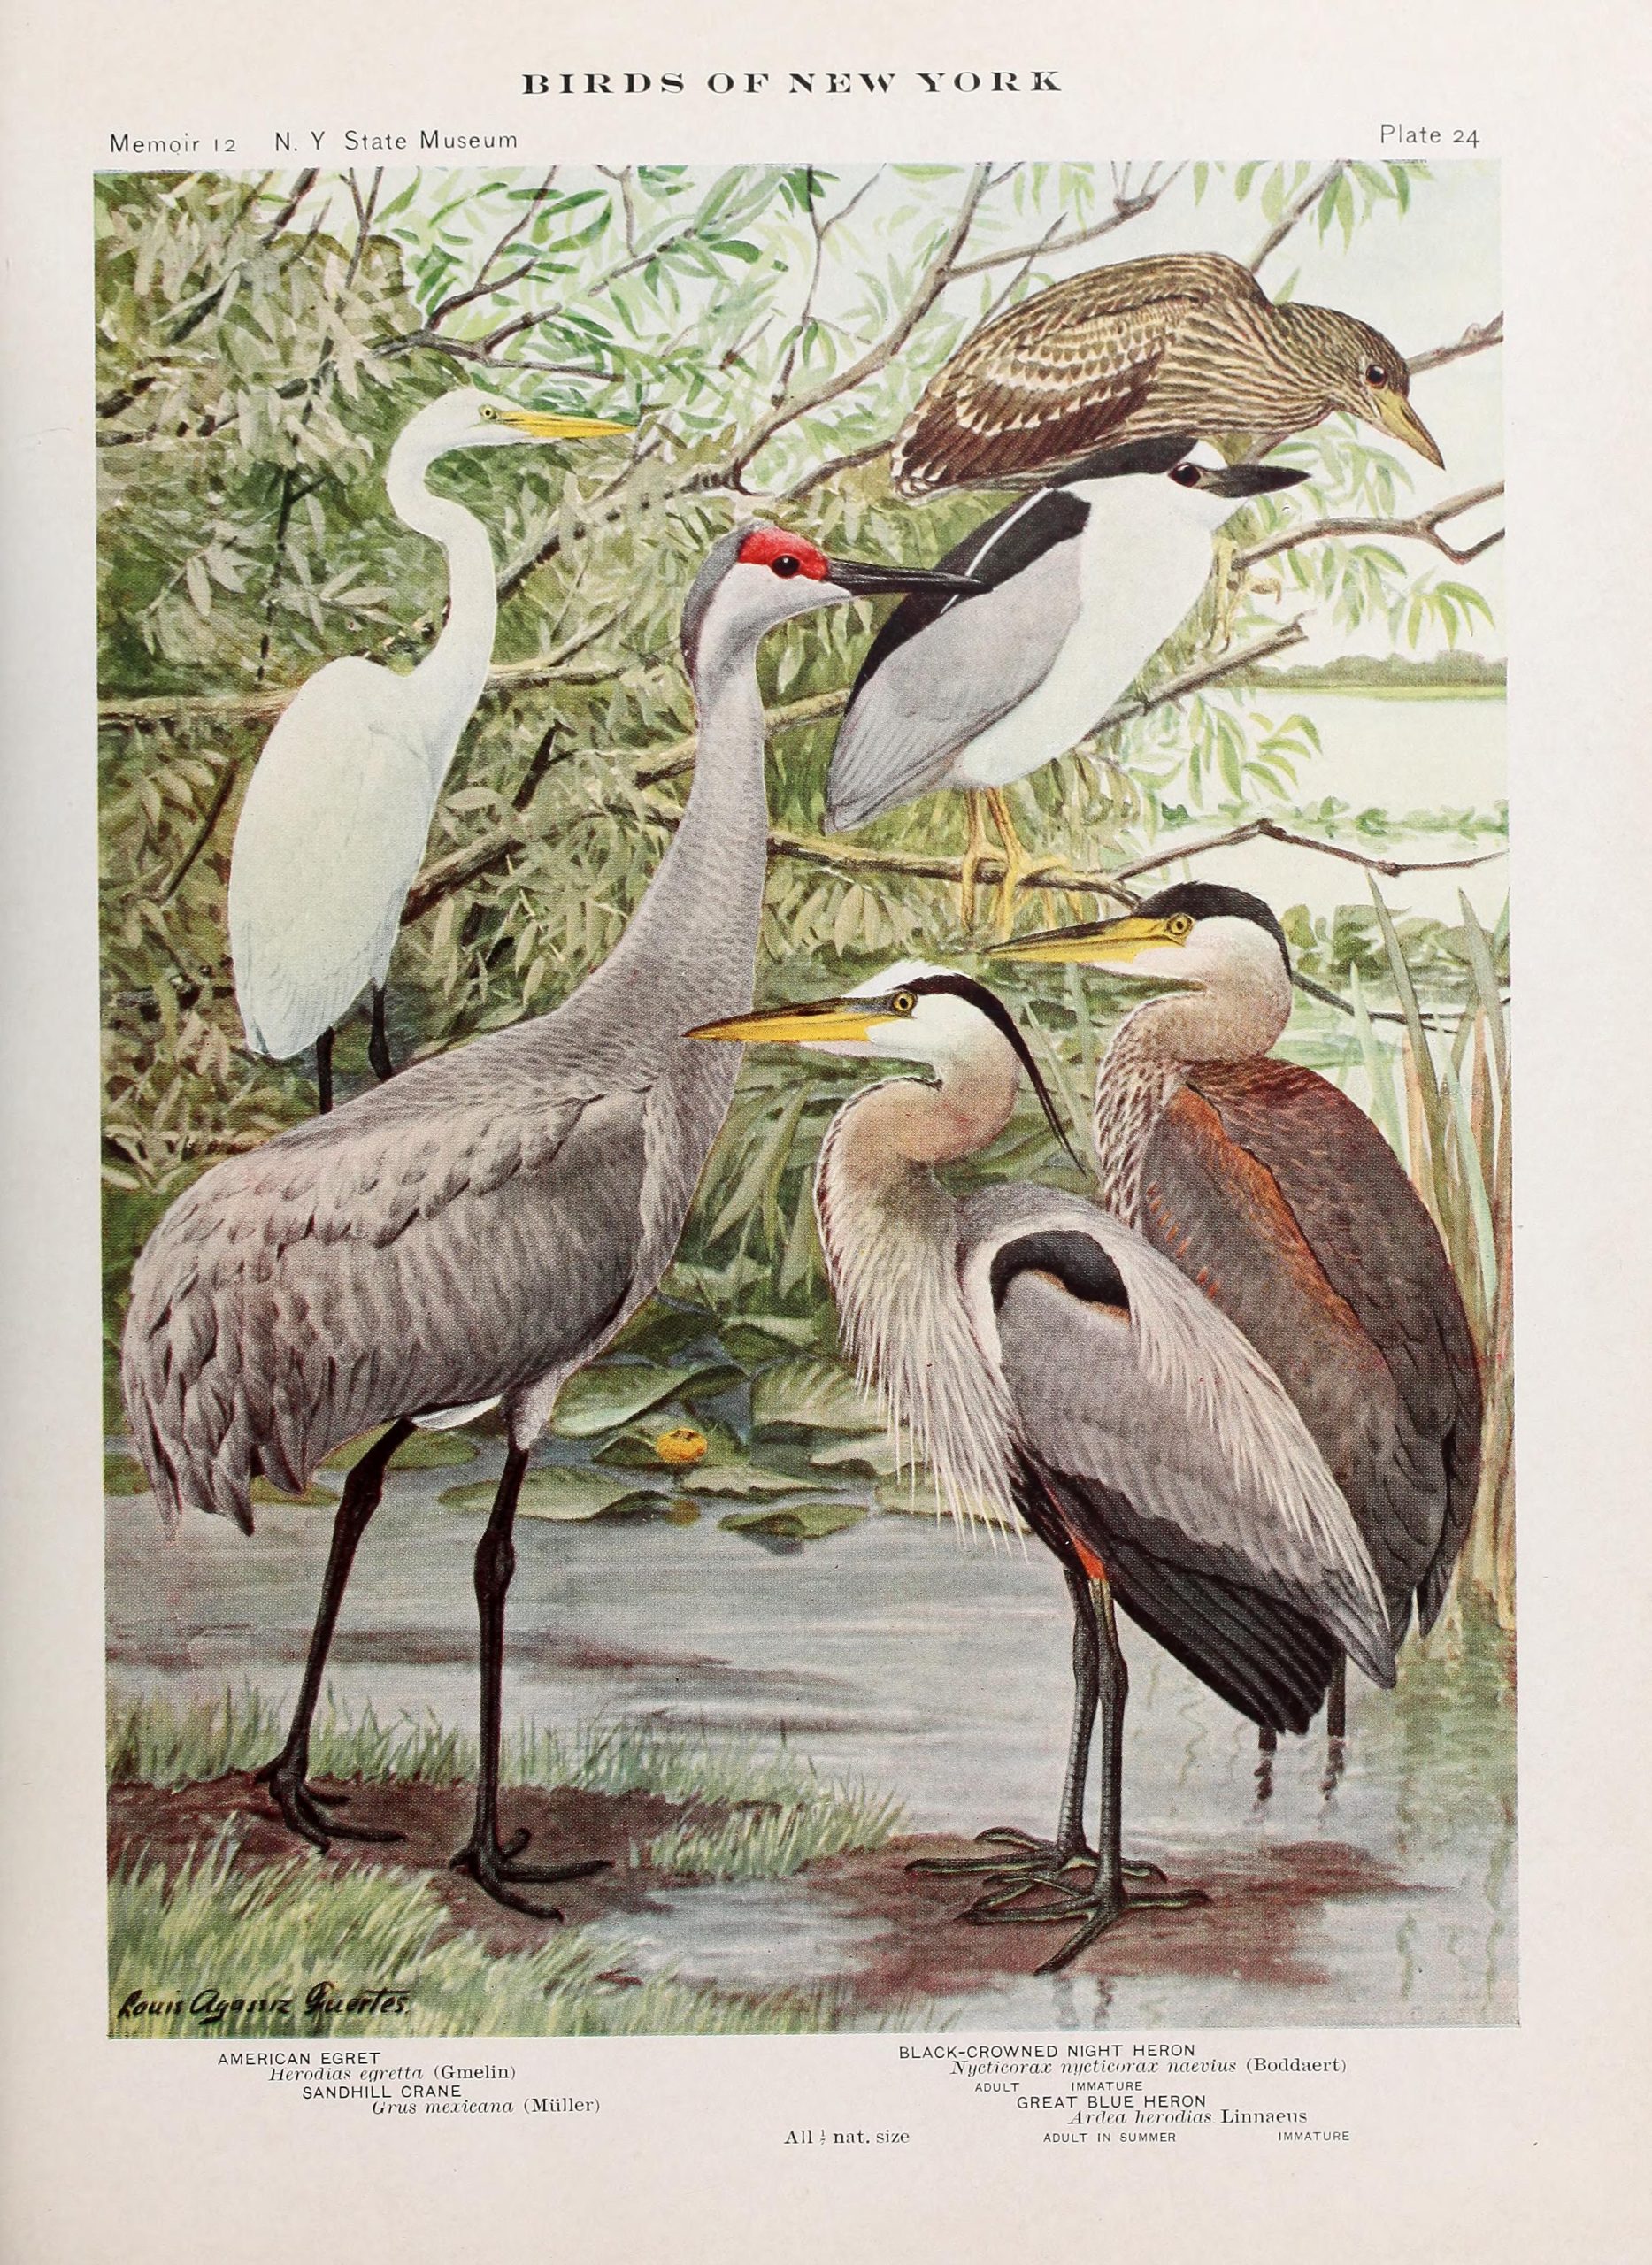 A painting of a group of different heron species standing in marshland.